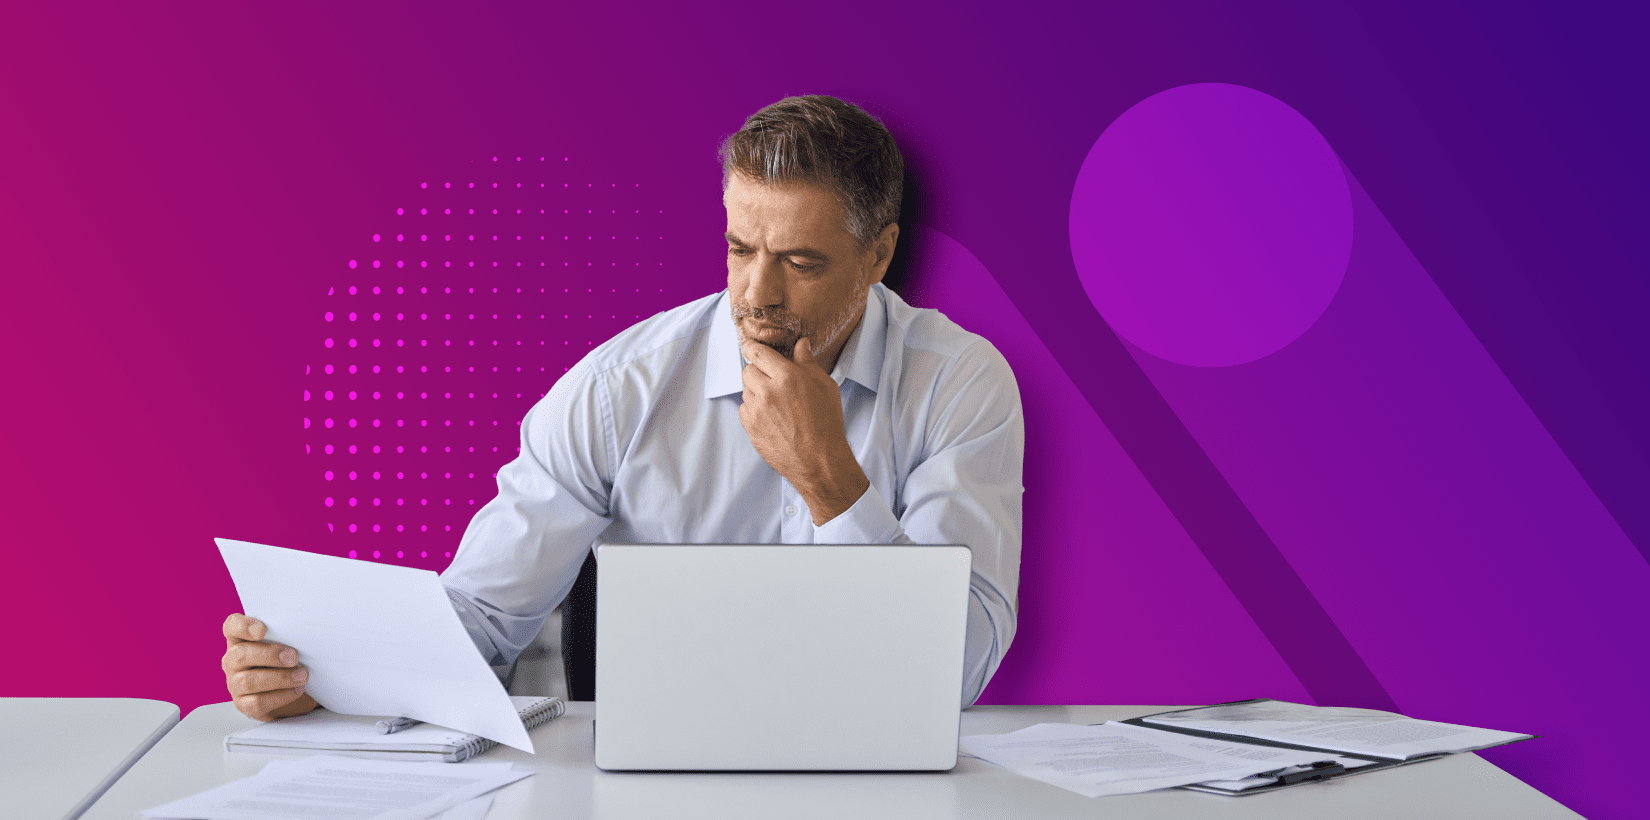 man on laptop with purple background doing inside sales